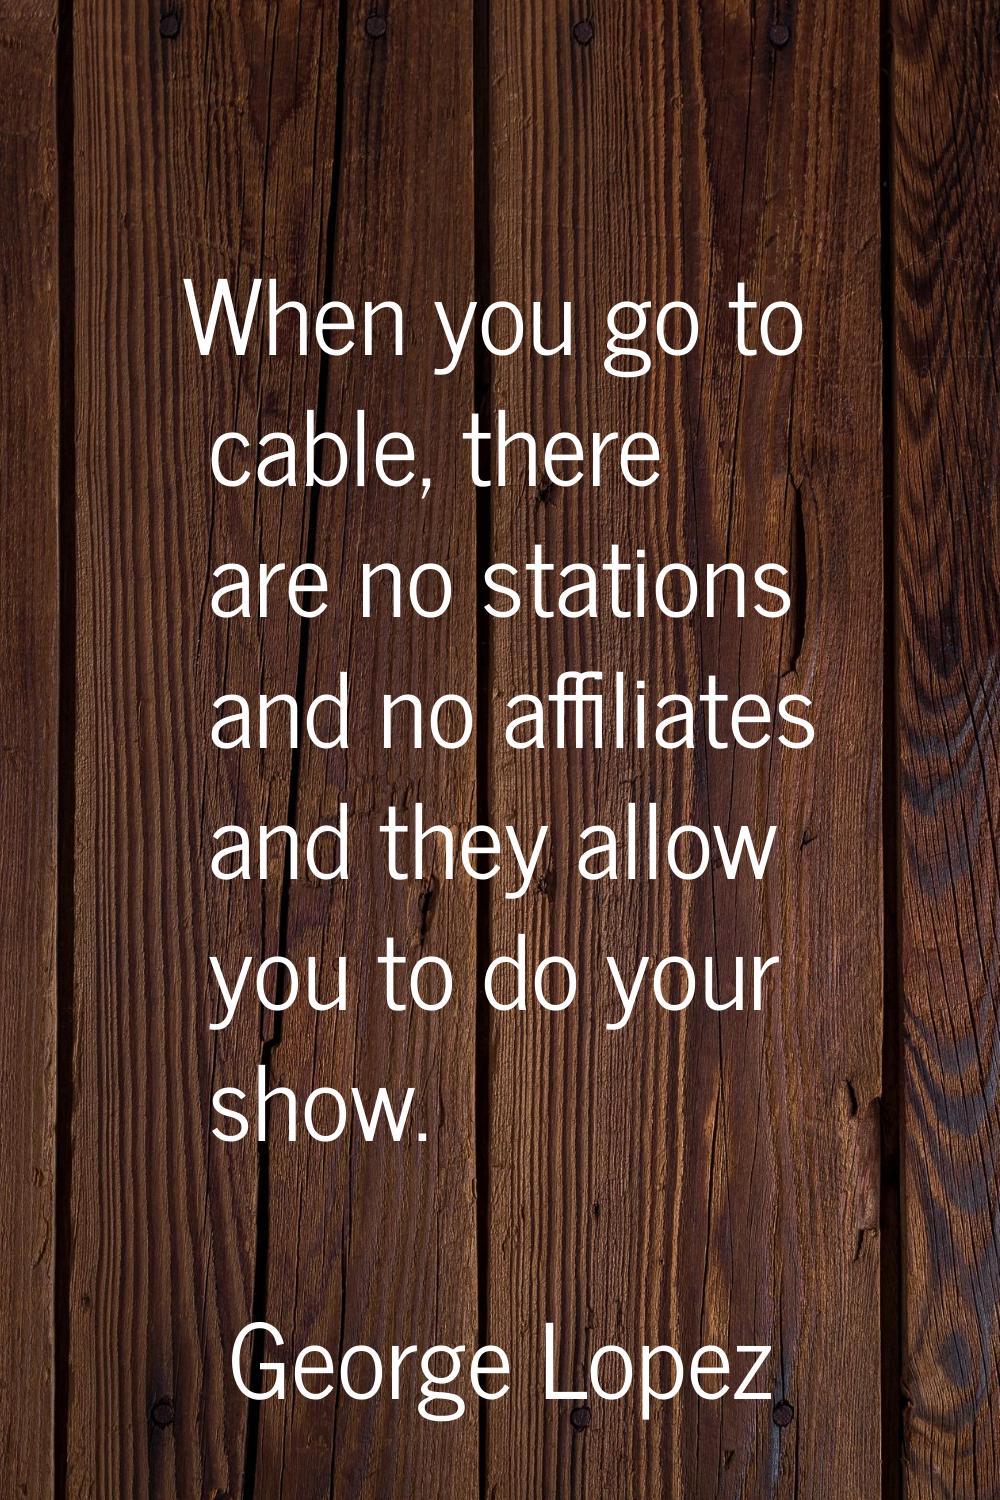 When you go to cable, there are no stations and no affiliates and they allow you to do your show.